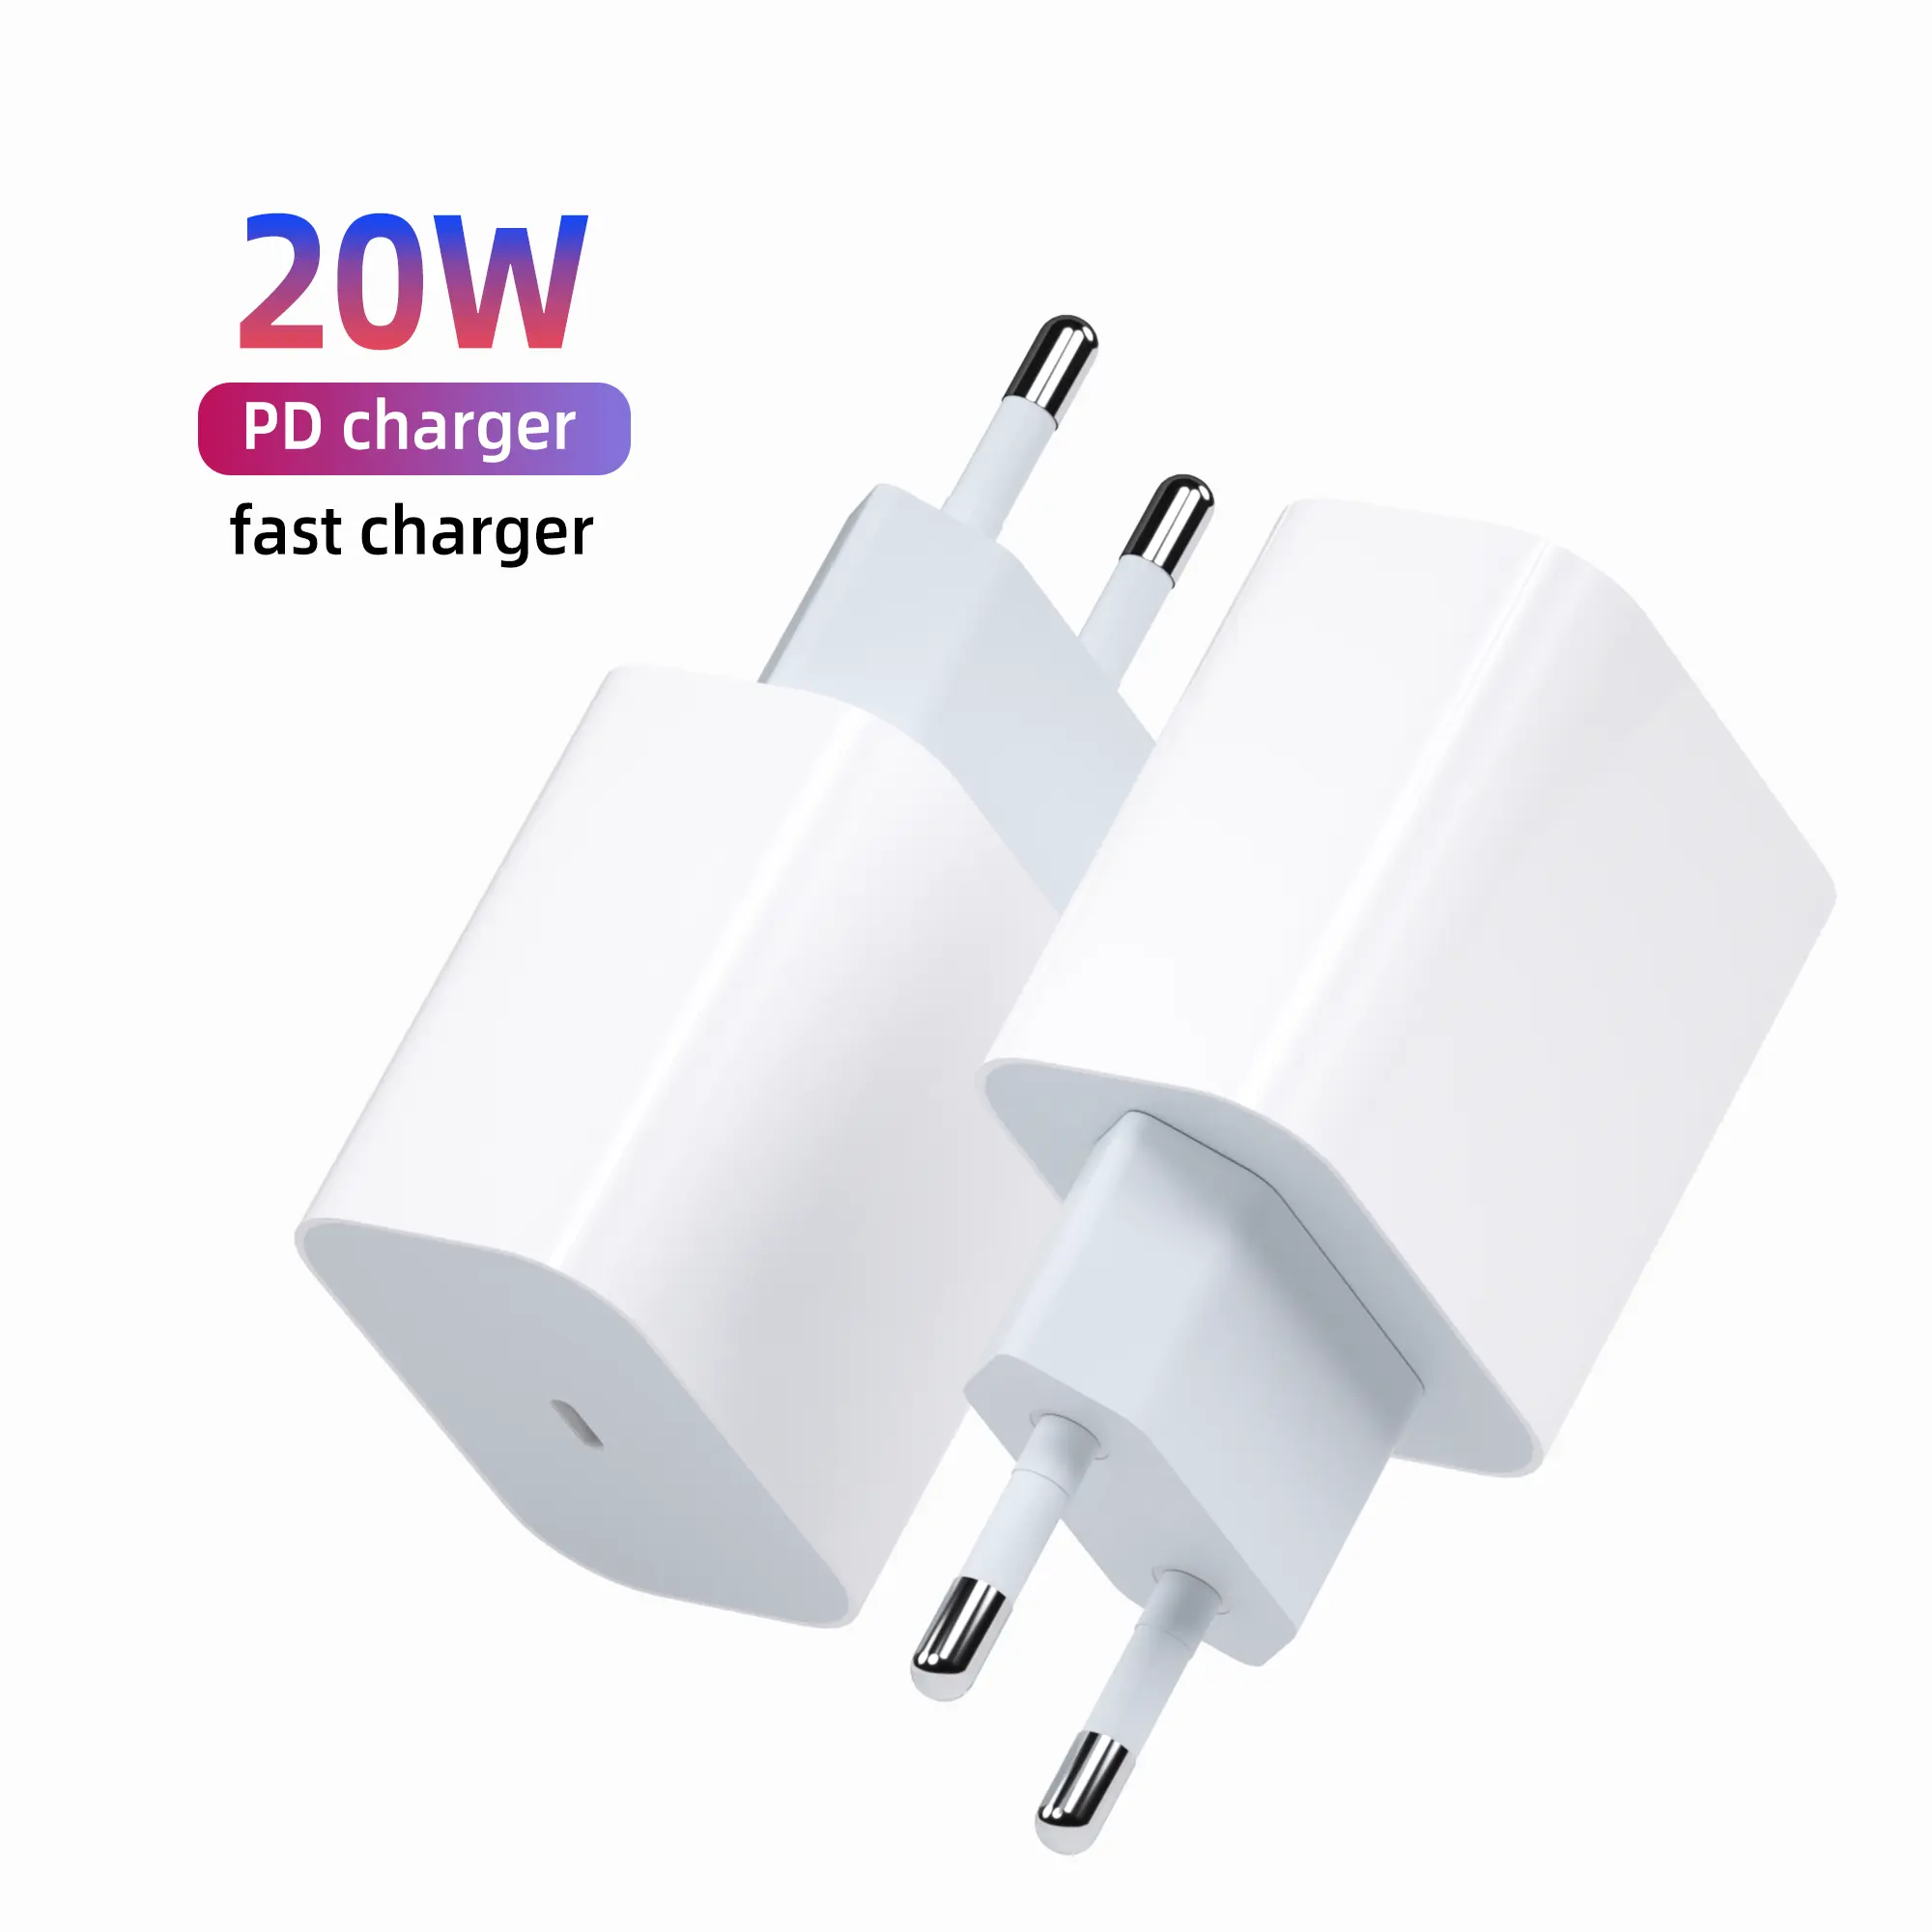 20W PD Fast Charging Usb C Charger For Apple Iphone 12 Pro MAX 12 Mini 11 Xs PD Charger For AirPods Max IPad Air 4 2020 IPad Pro